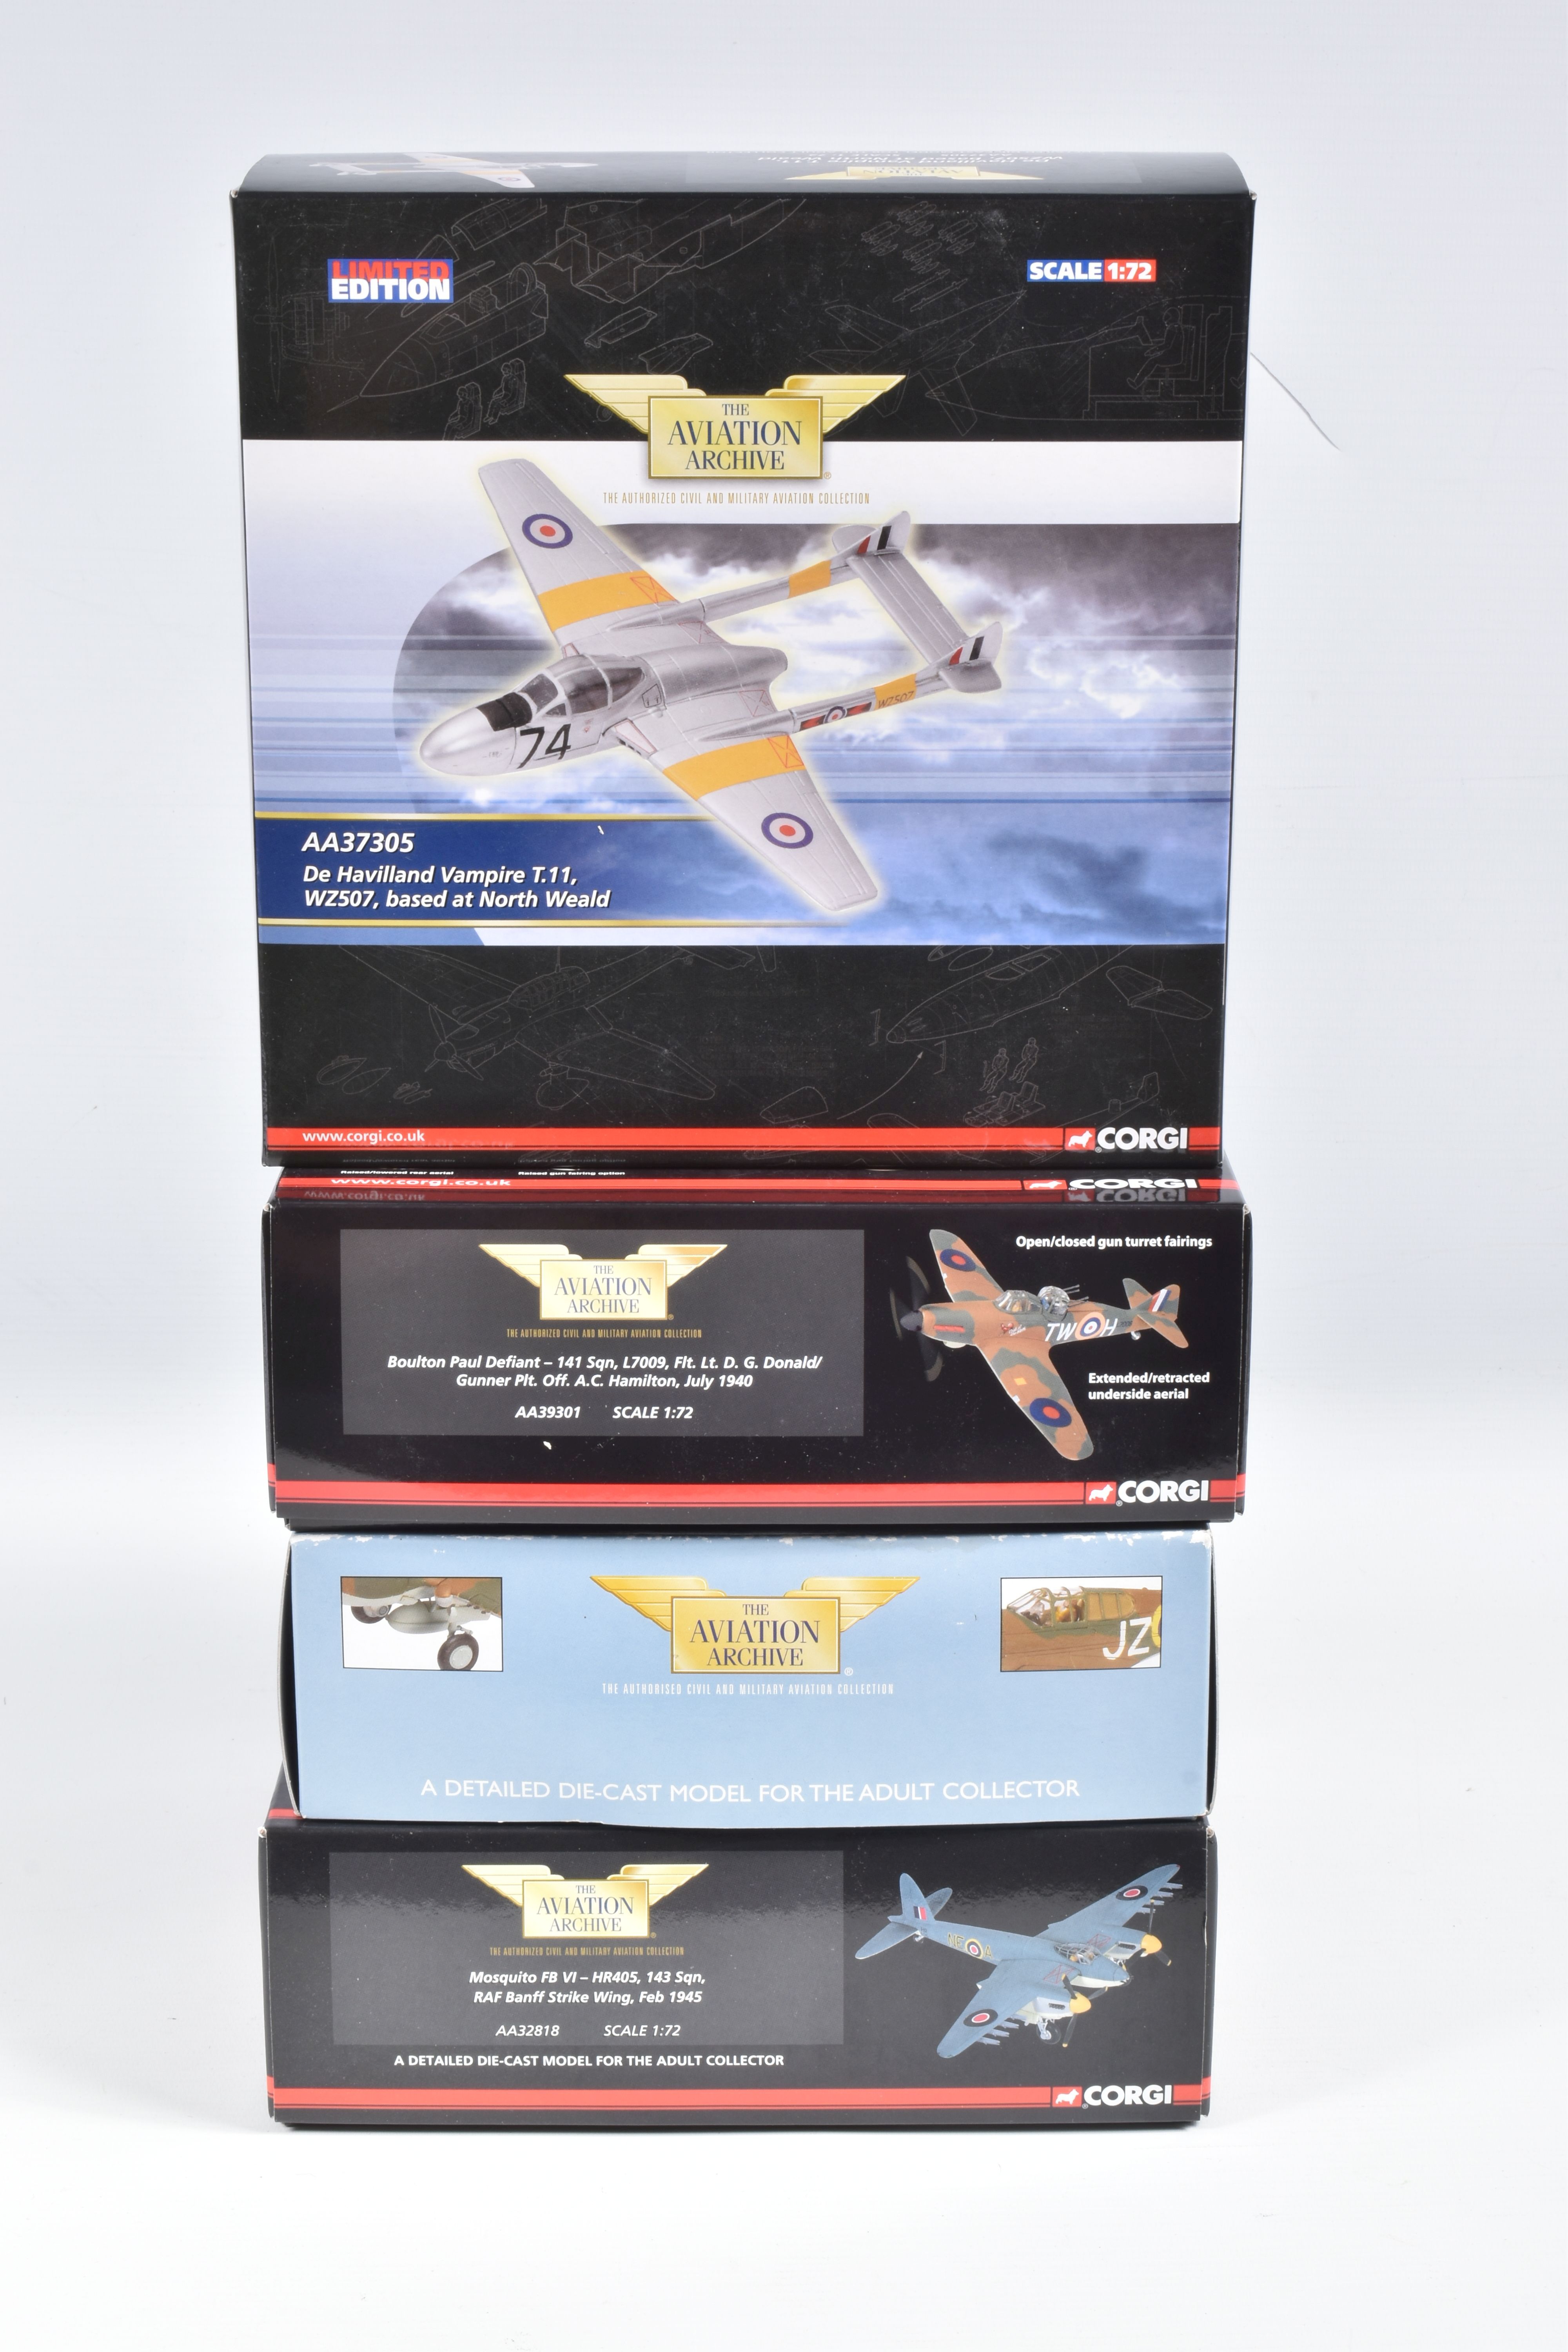 FOUR BOXED 1:27 SCALE LIMITED EDITION CORGI AVIATION ARCHIVE DIECAST MODEL AIRCRAFTS, the first is a